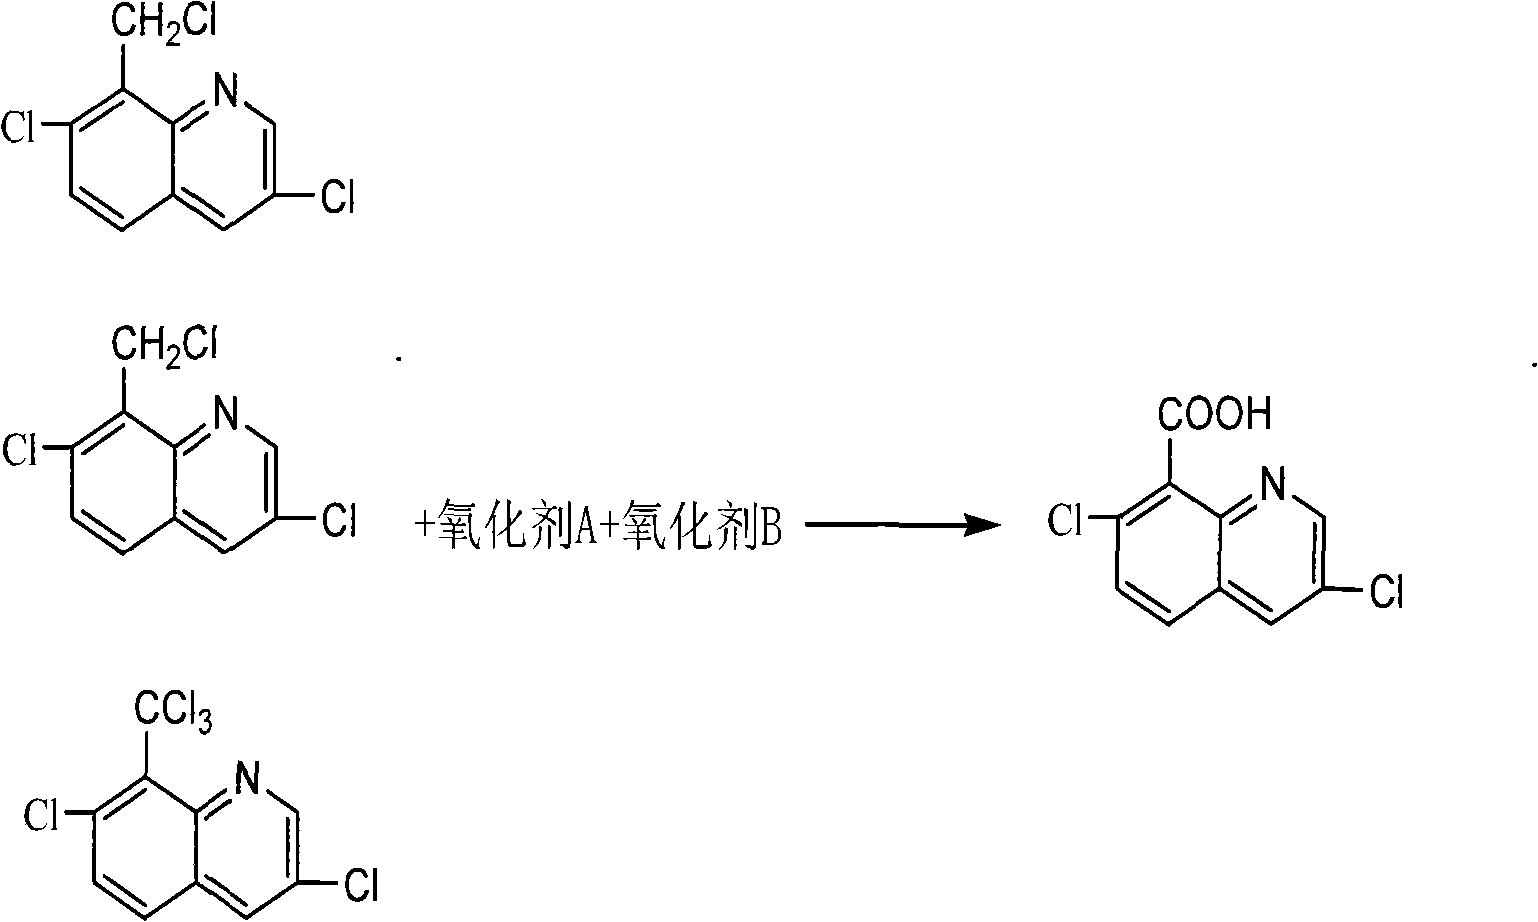 Process for synthesizing quinclorac by oxidizing reaction